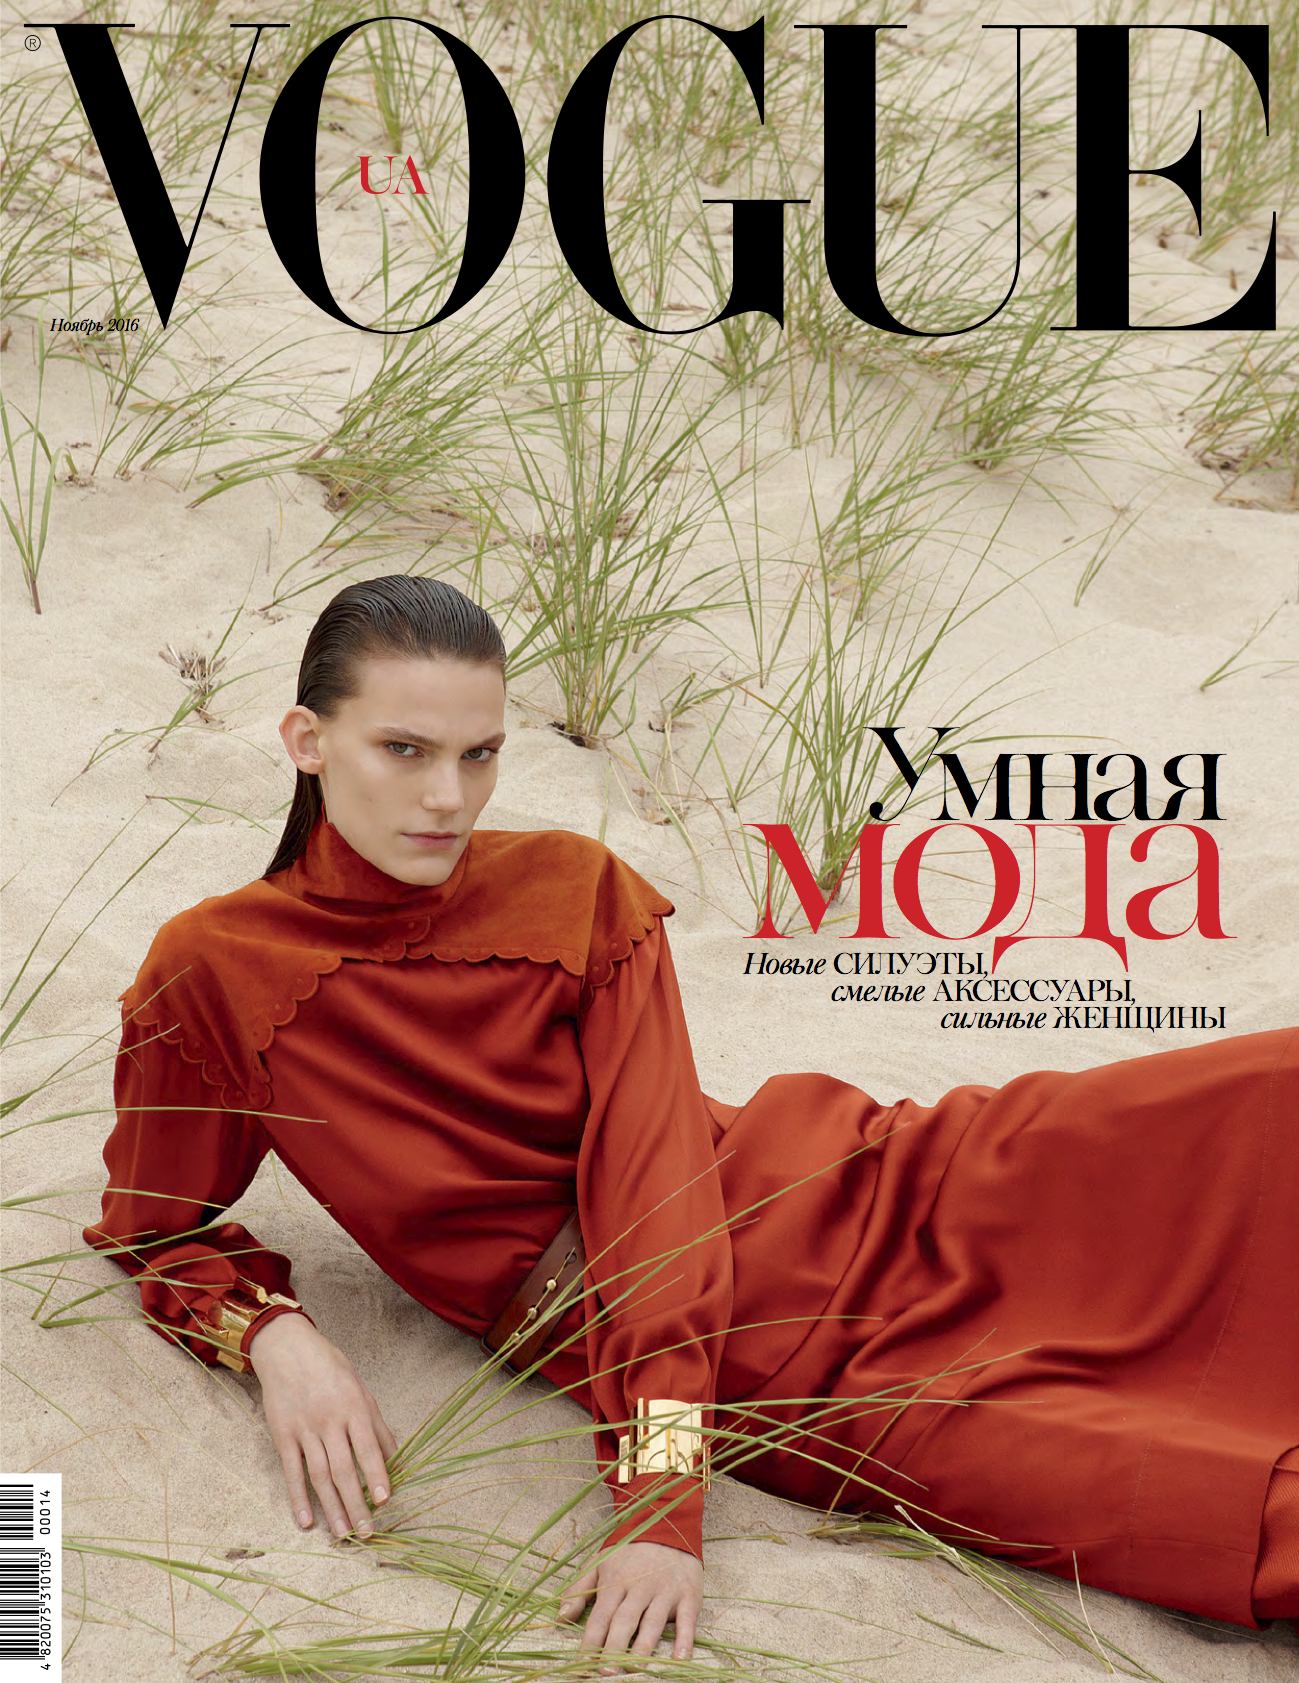 Vogue Ukraine July 2016 by An Le on Previiew